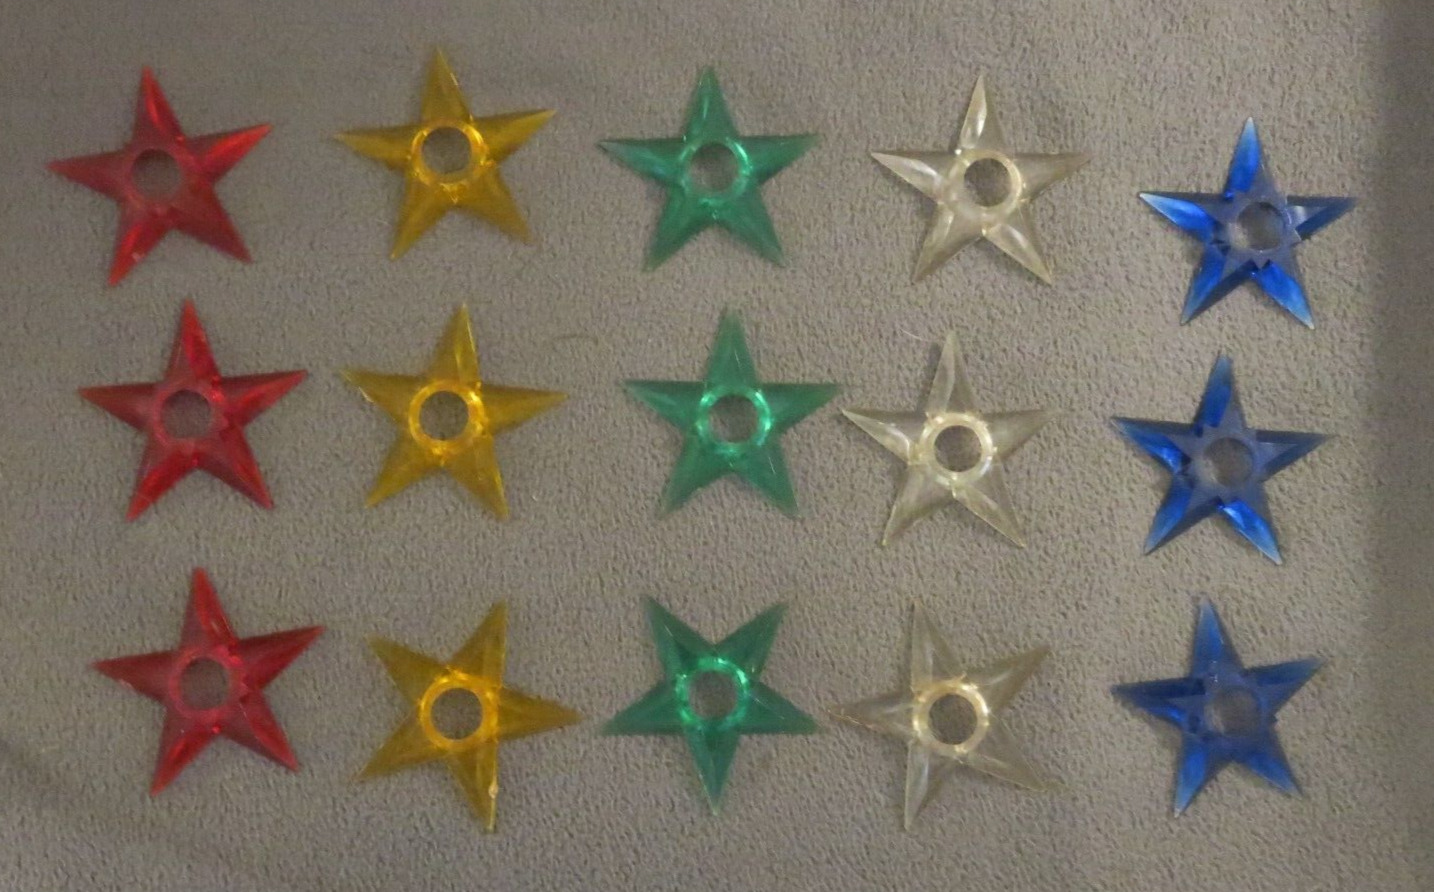 Lot of 15 Vintage Plastic Star Christmas Light Reflectors Yellow Blue Red Green